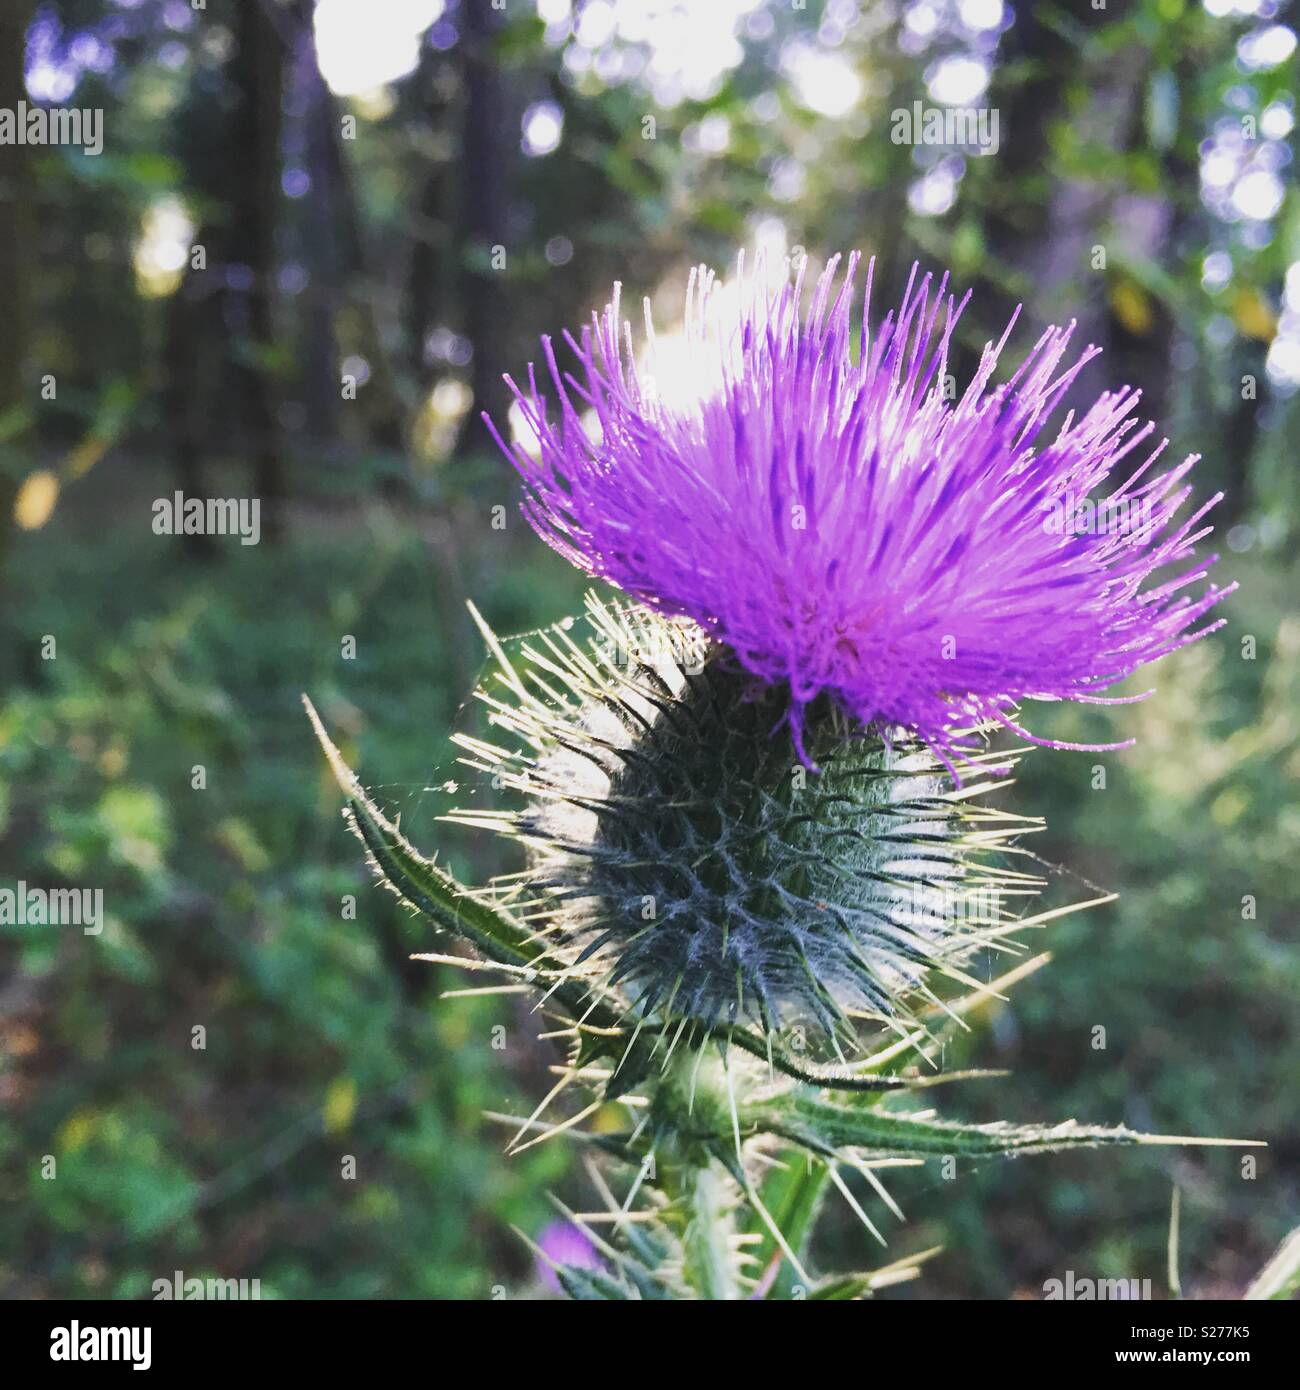 A spiky purple flower in the woods. Stock Photo